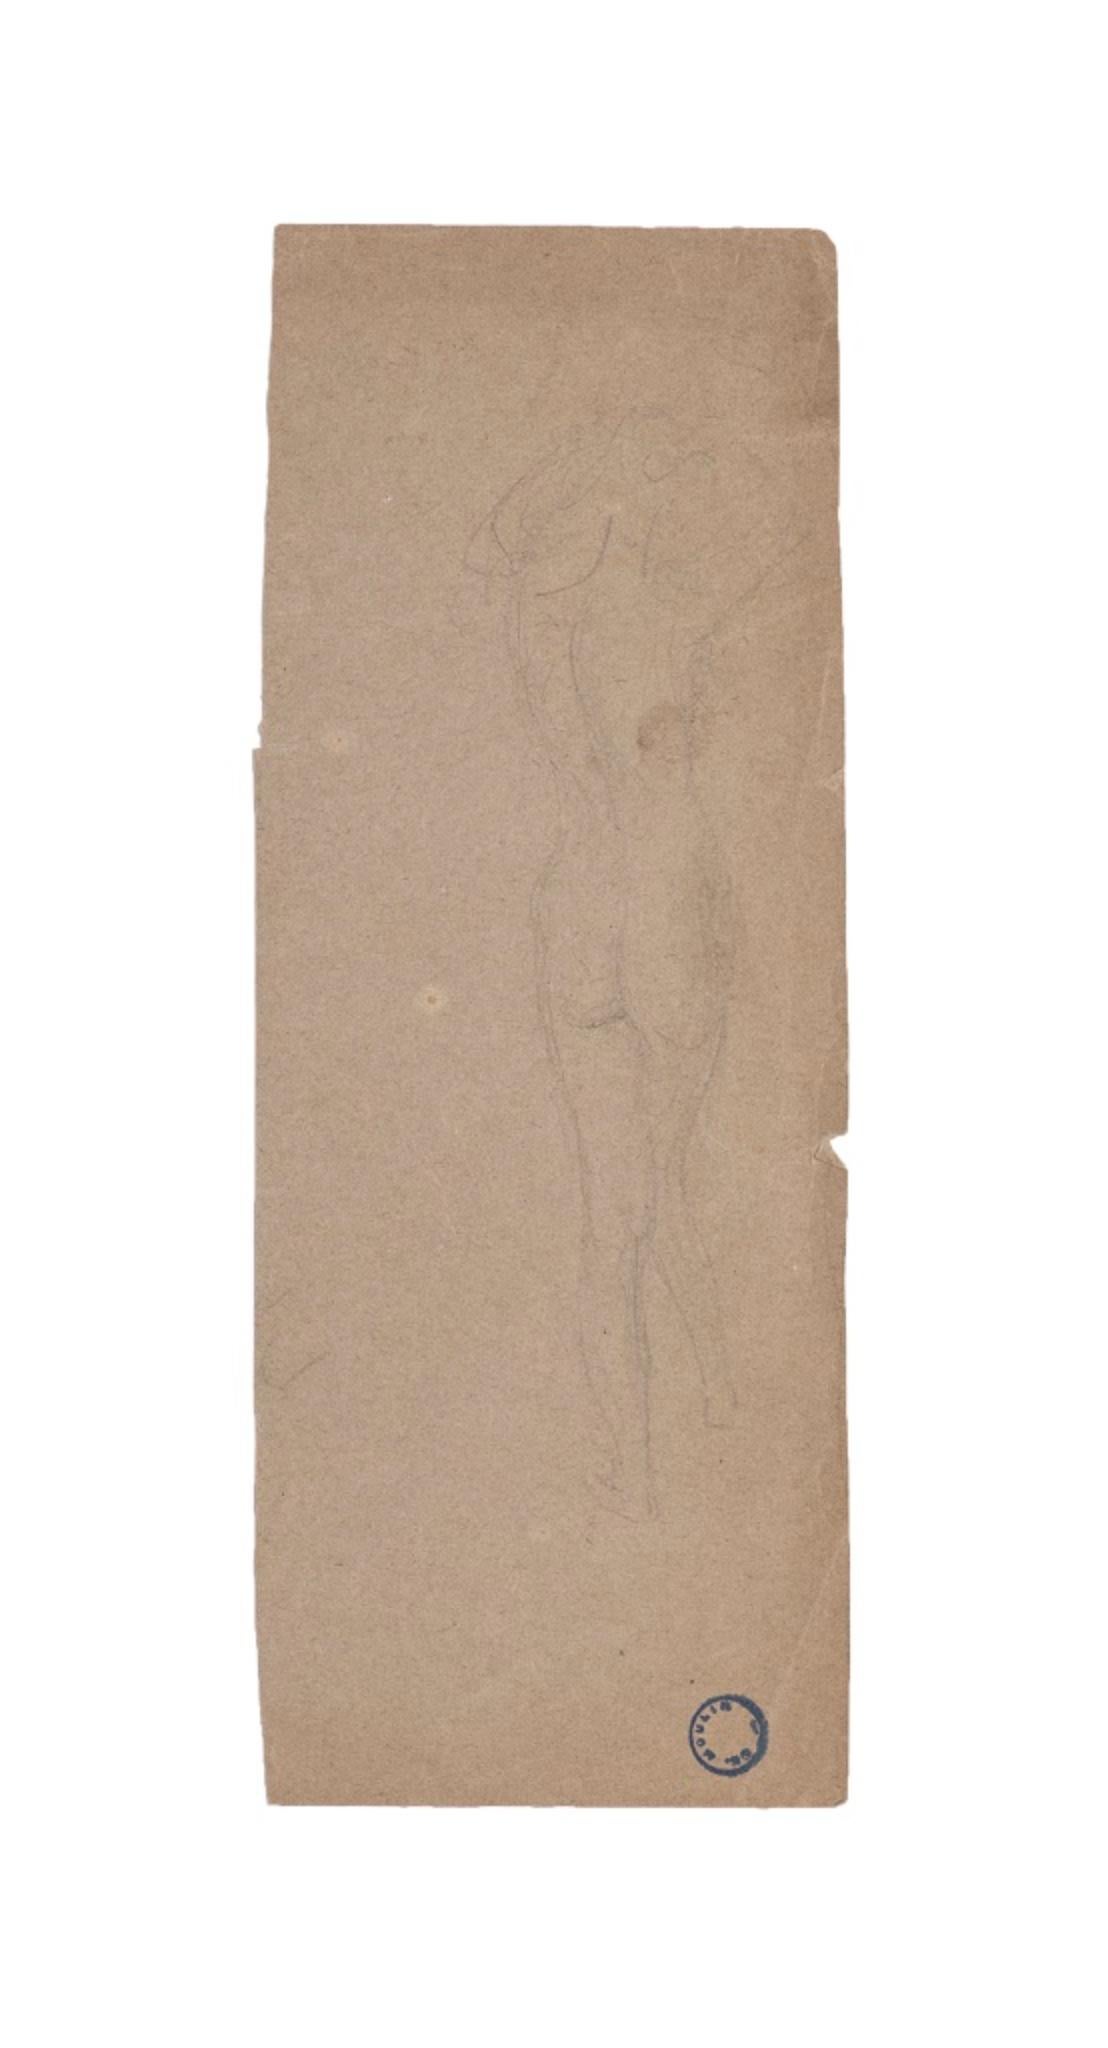 Nude of Woman - Original Pencil by Charles Lucien Moulin - Early 20th Century